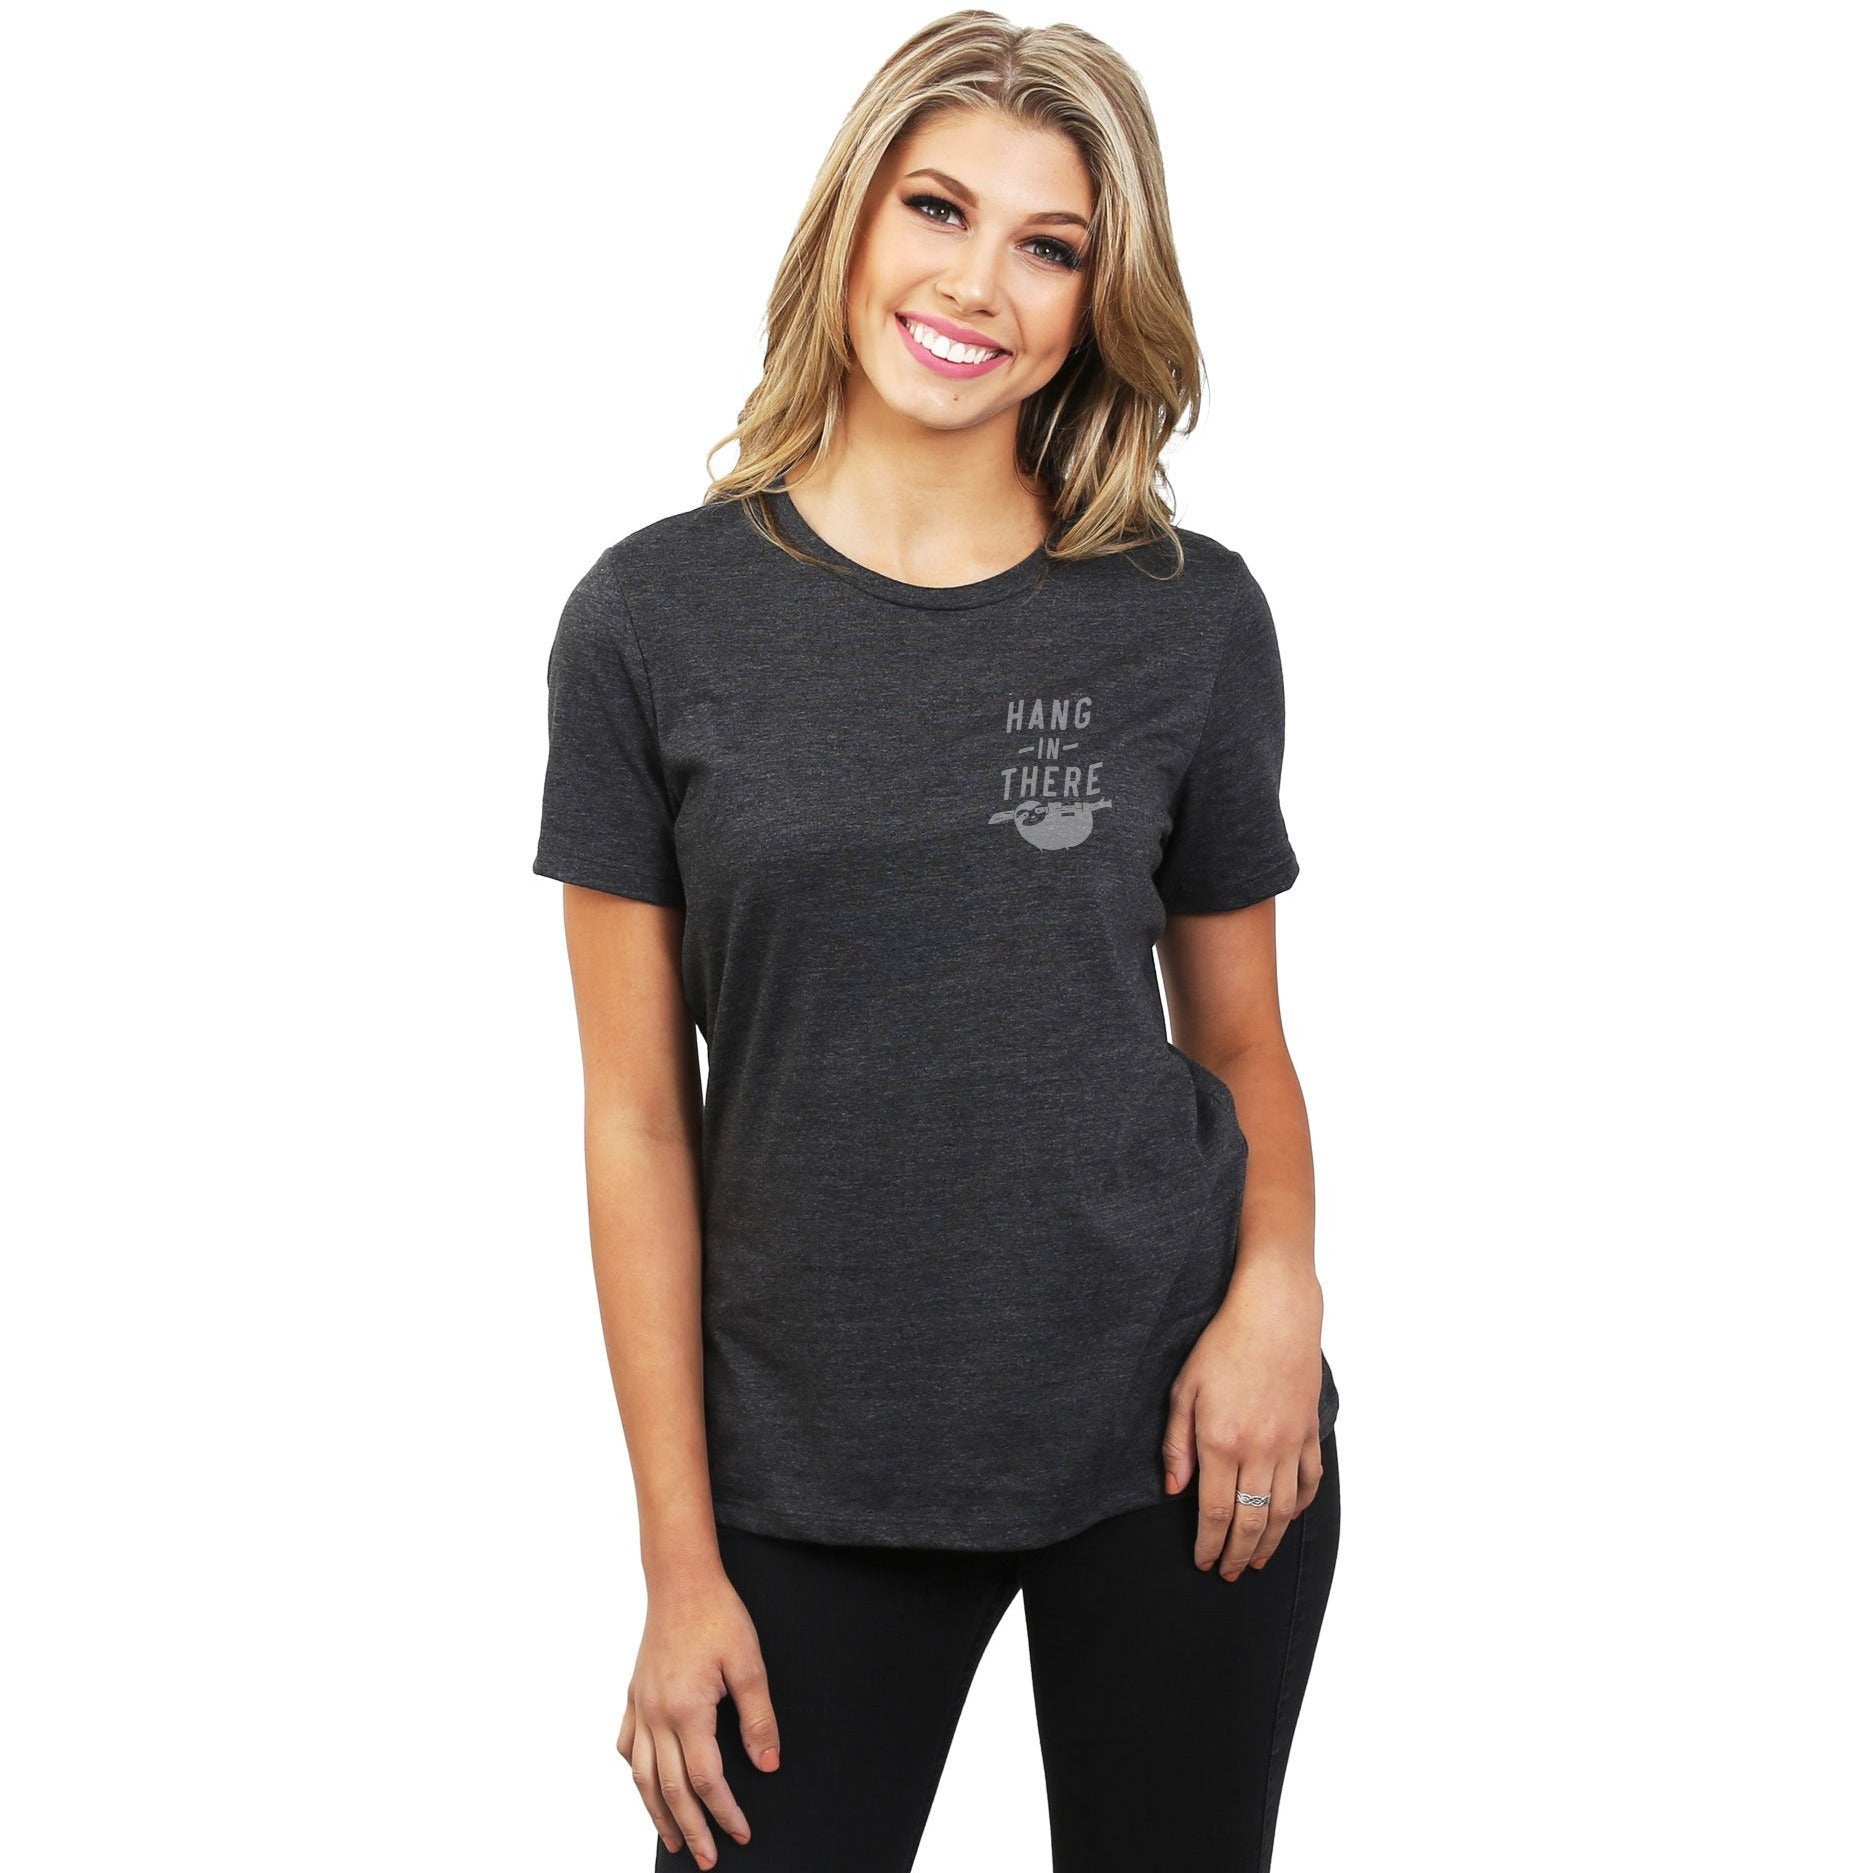 Hang In There Women's Relaxed Crewneck T-Shirt Top Tee Charcoal Model
